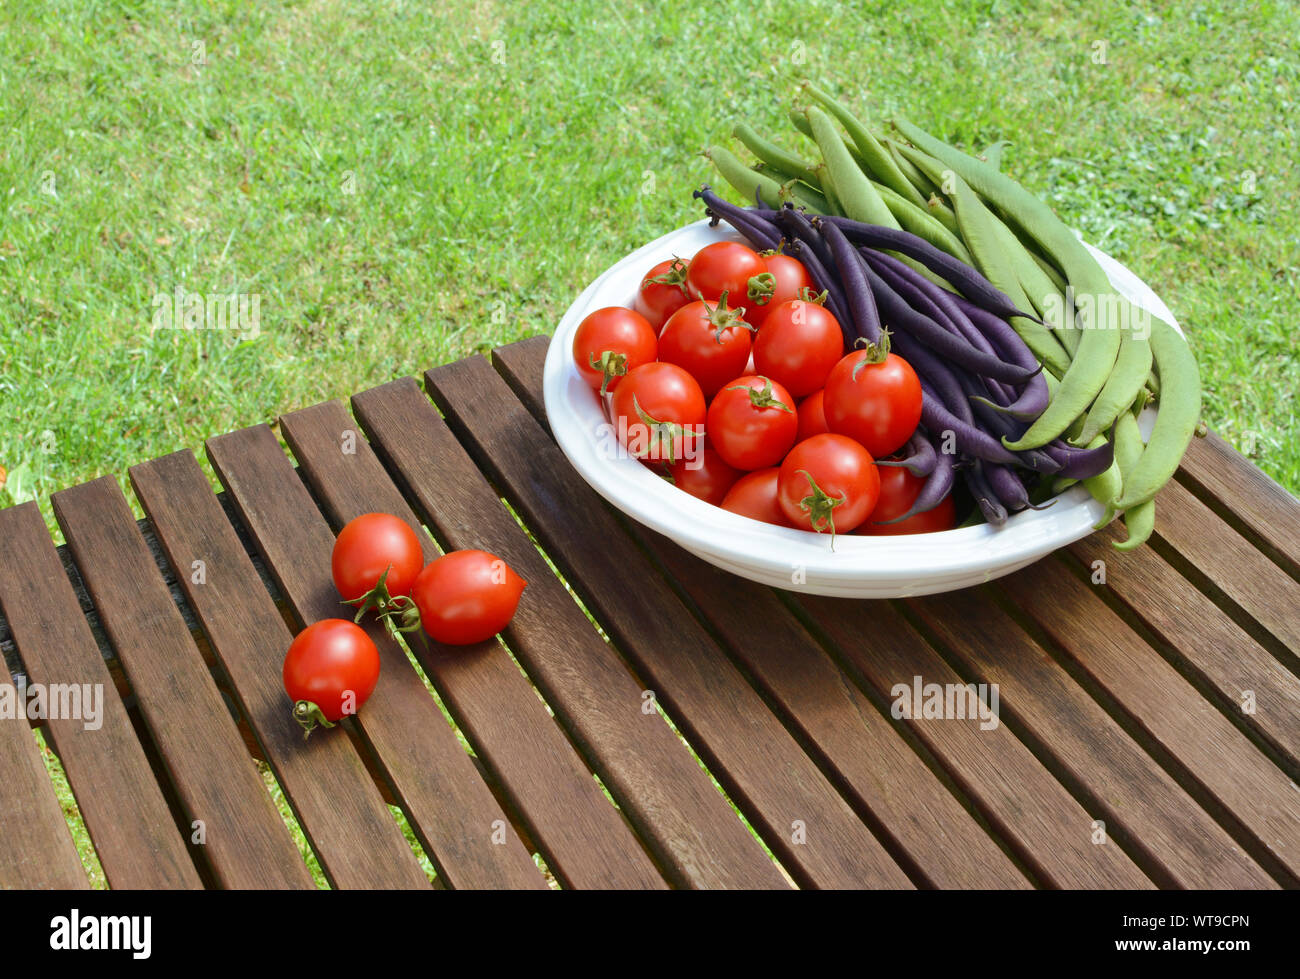 Red tomatoes with green and purple beans in a dish, some cherry tomatoes spilled on a wooden picnic table Stock Photo